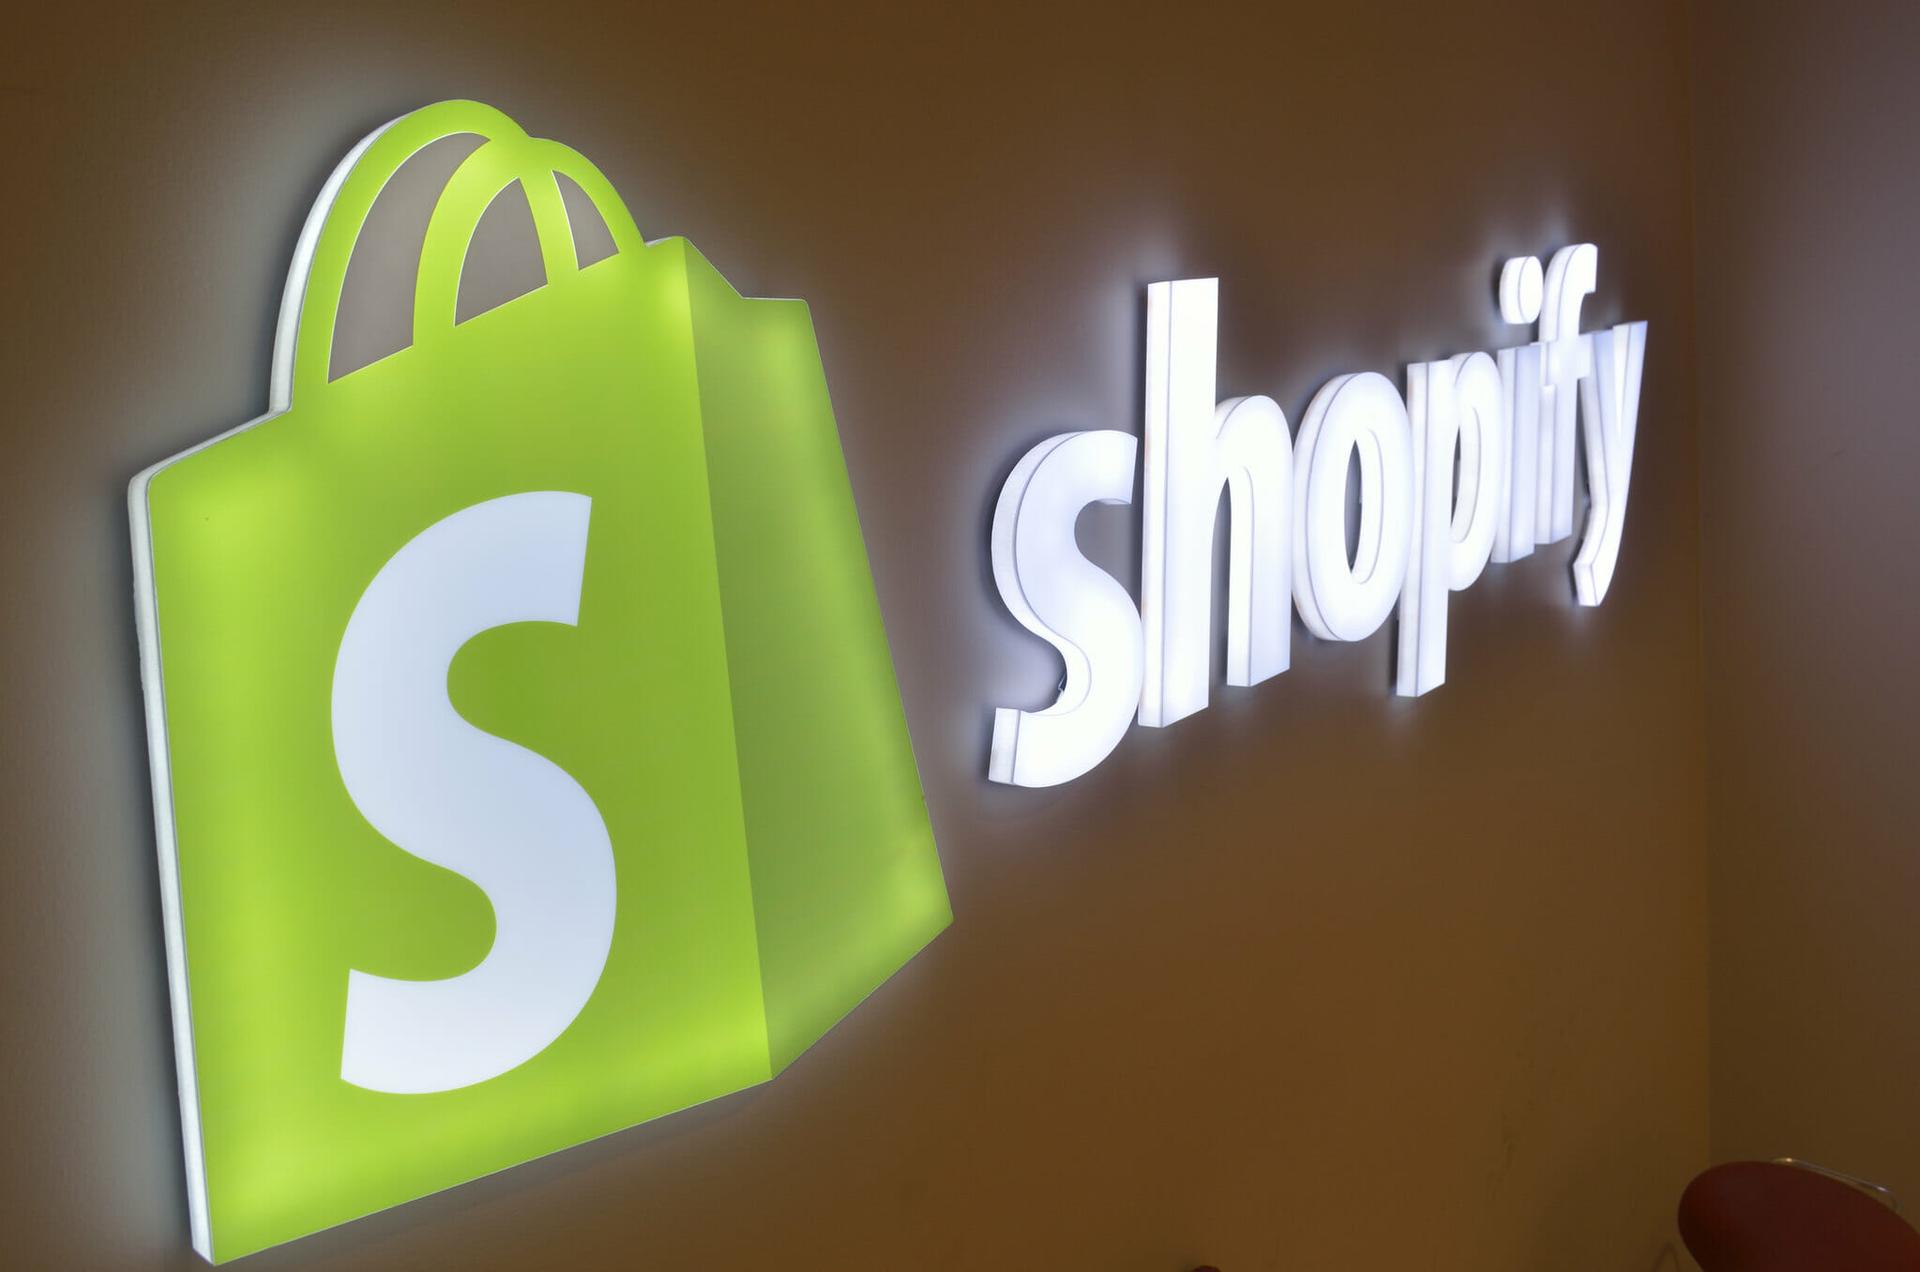 Shopify was considered one of the more innovative companies in 2020 for the way it emerged at a go-to ecommerce brand during the pandemic. Today’s columnist, Alex Moiseev of Kaspersky, says companies need to focus on innovation to survive and thrive in the year ahead. (Credit: CC 0 1.0)